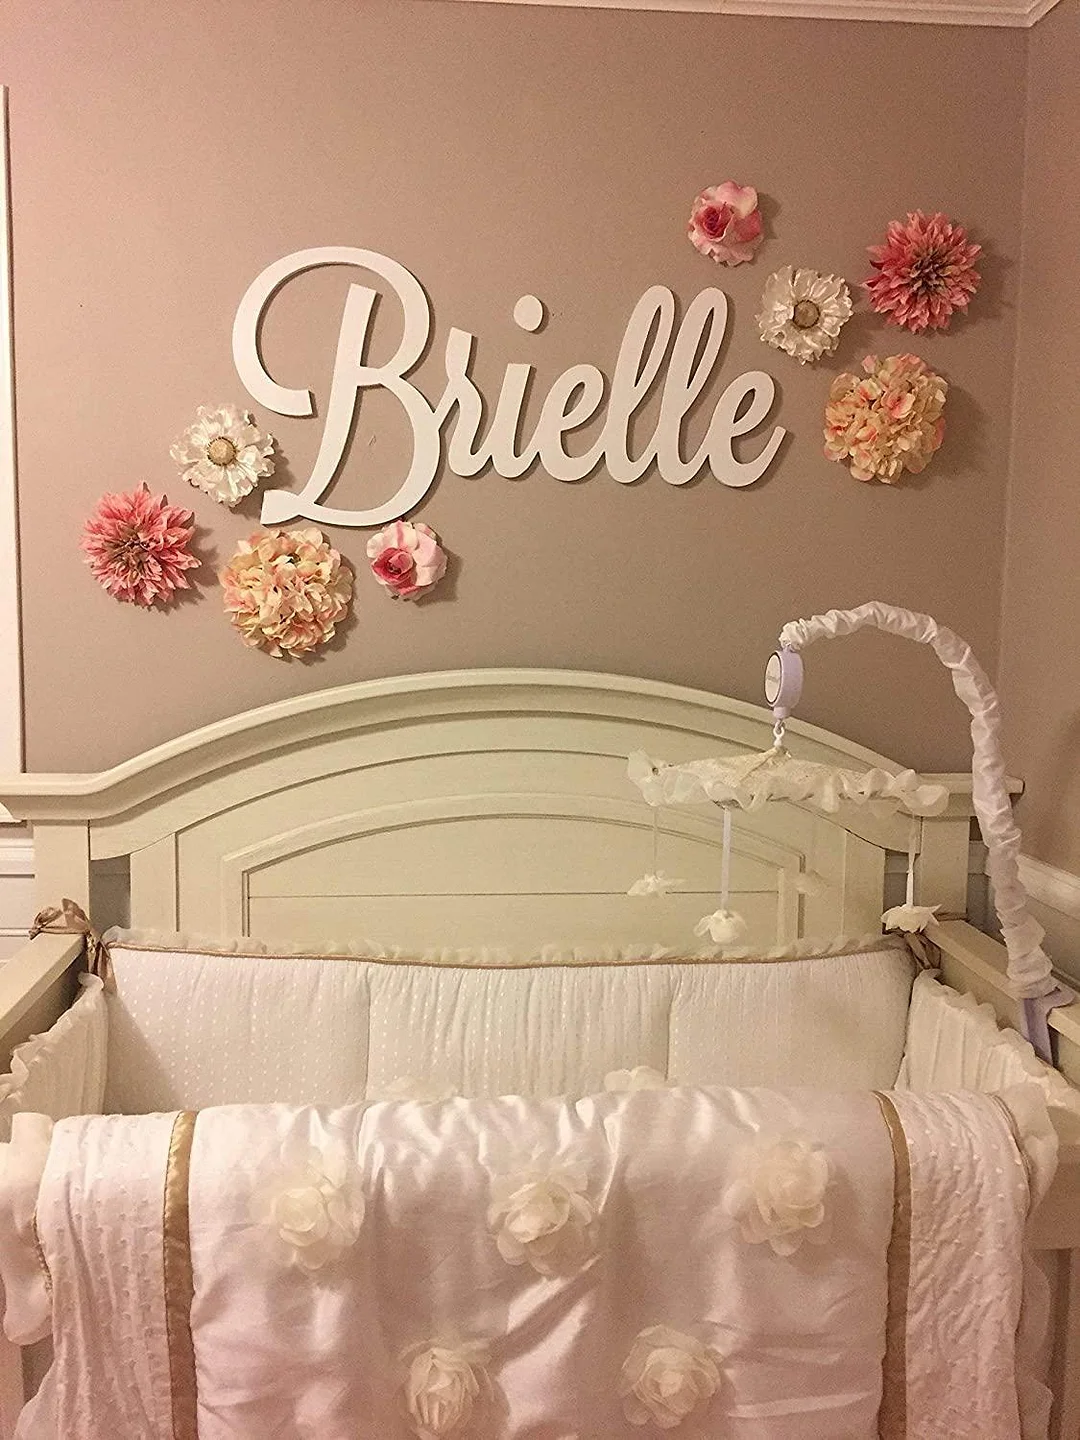 Personalized Wooden Name Sign Large size Letters Baby Name Plaque PAINTED nursery name nursery decor wall art 1020-2